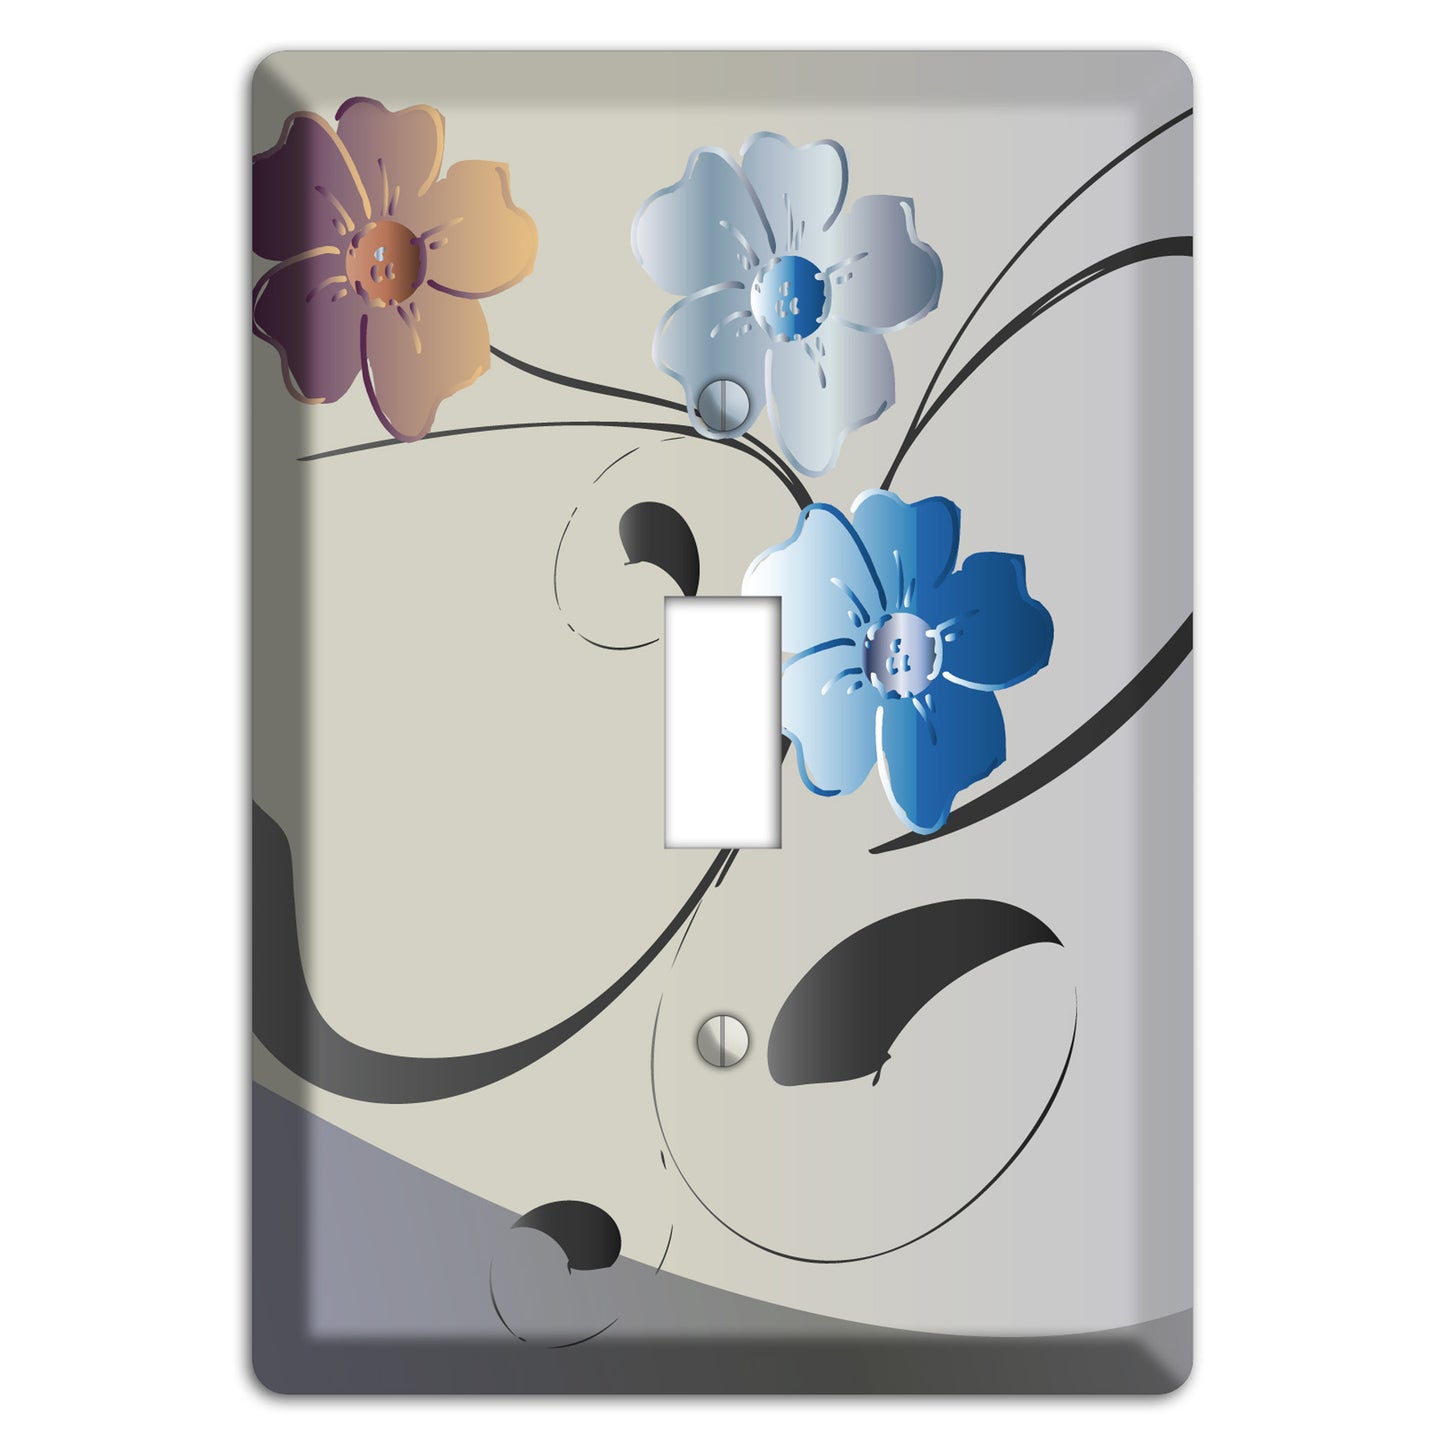 Grey and Blue Floral Sprig Cover Plates